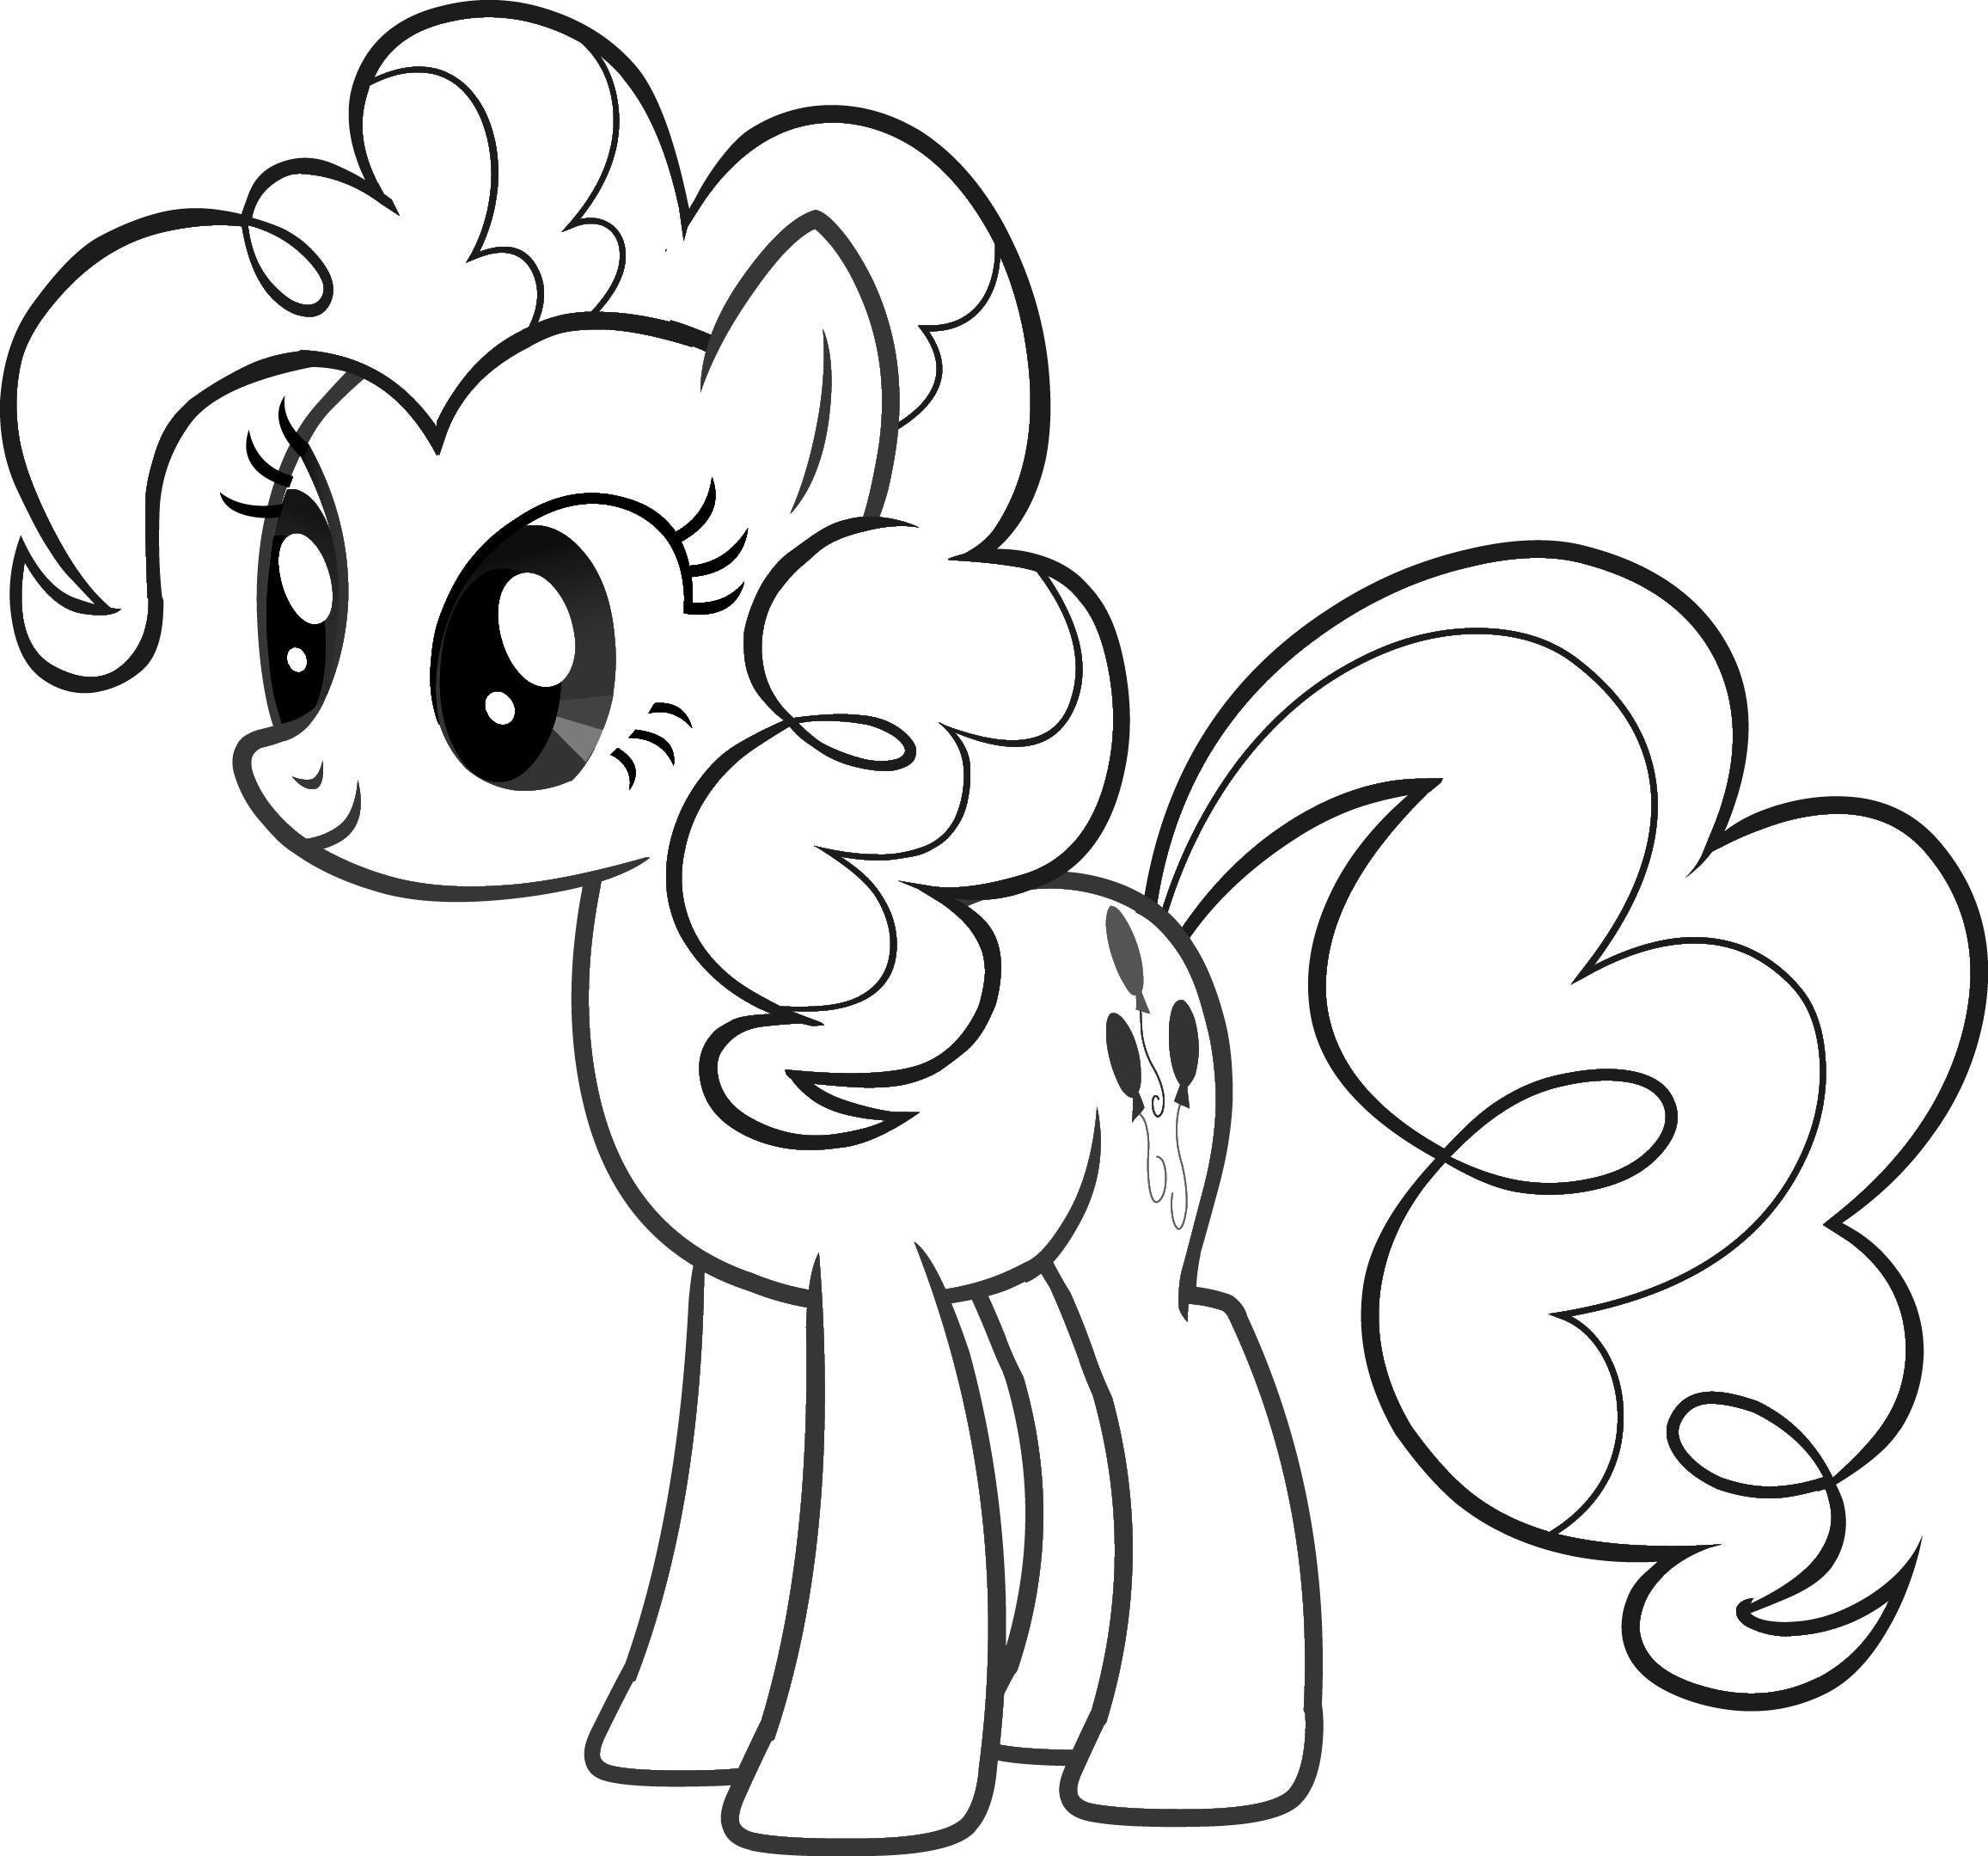 Free Coloring Pages Of Girls
 My little pony coloring pages